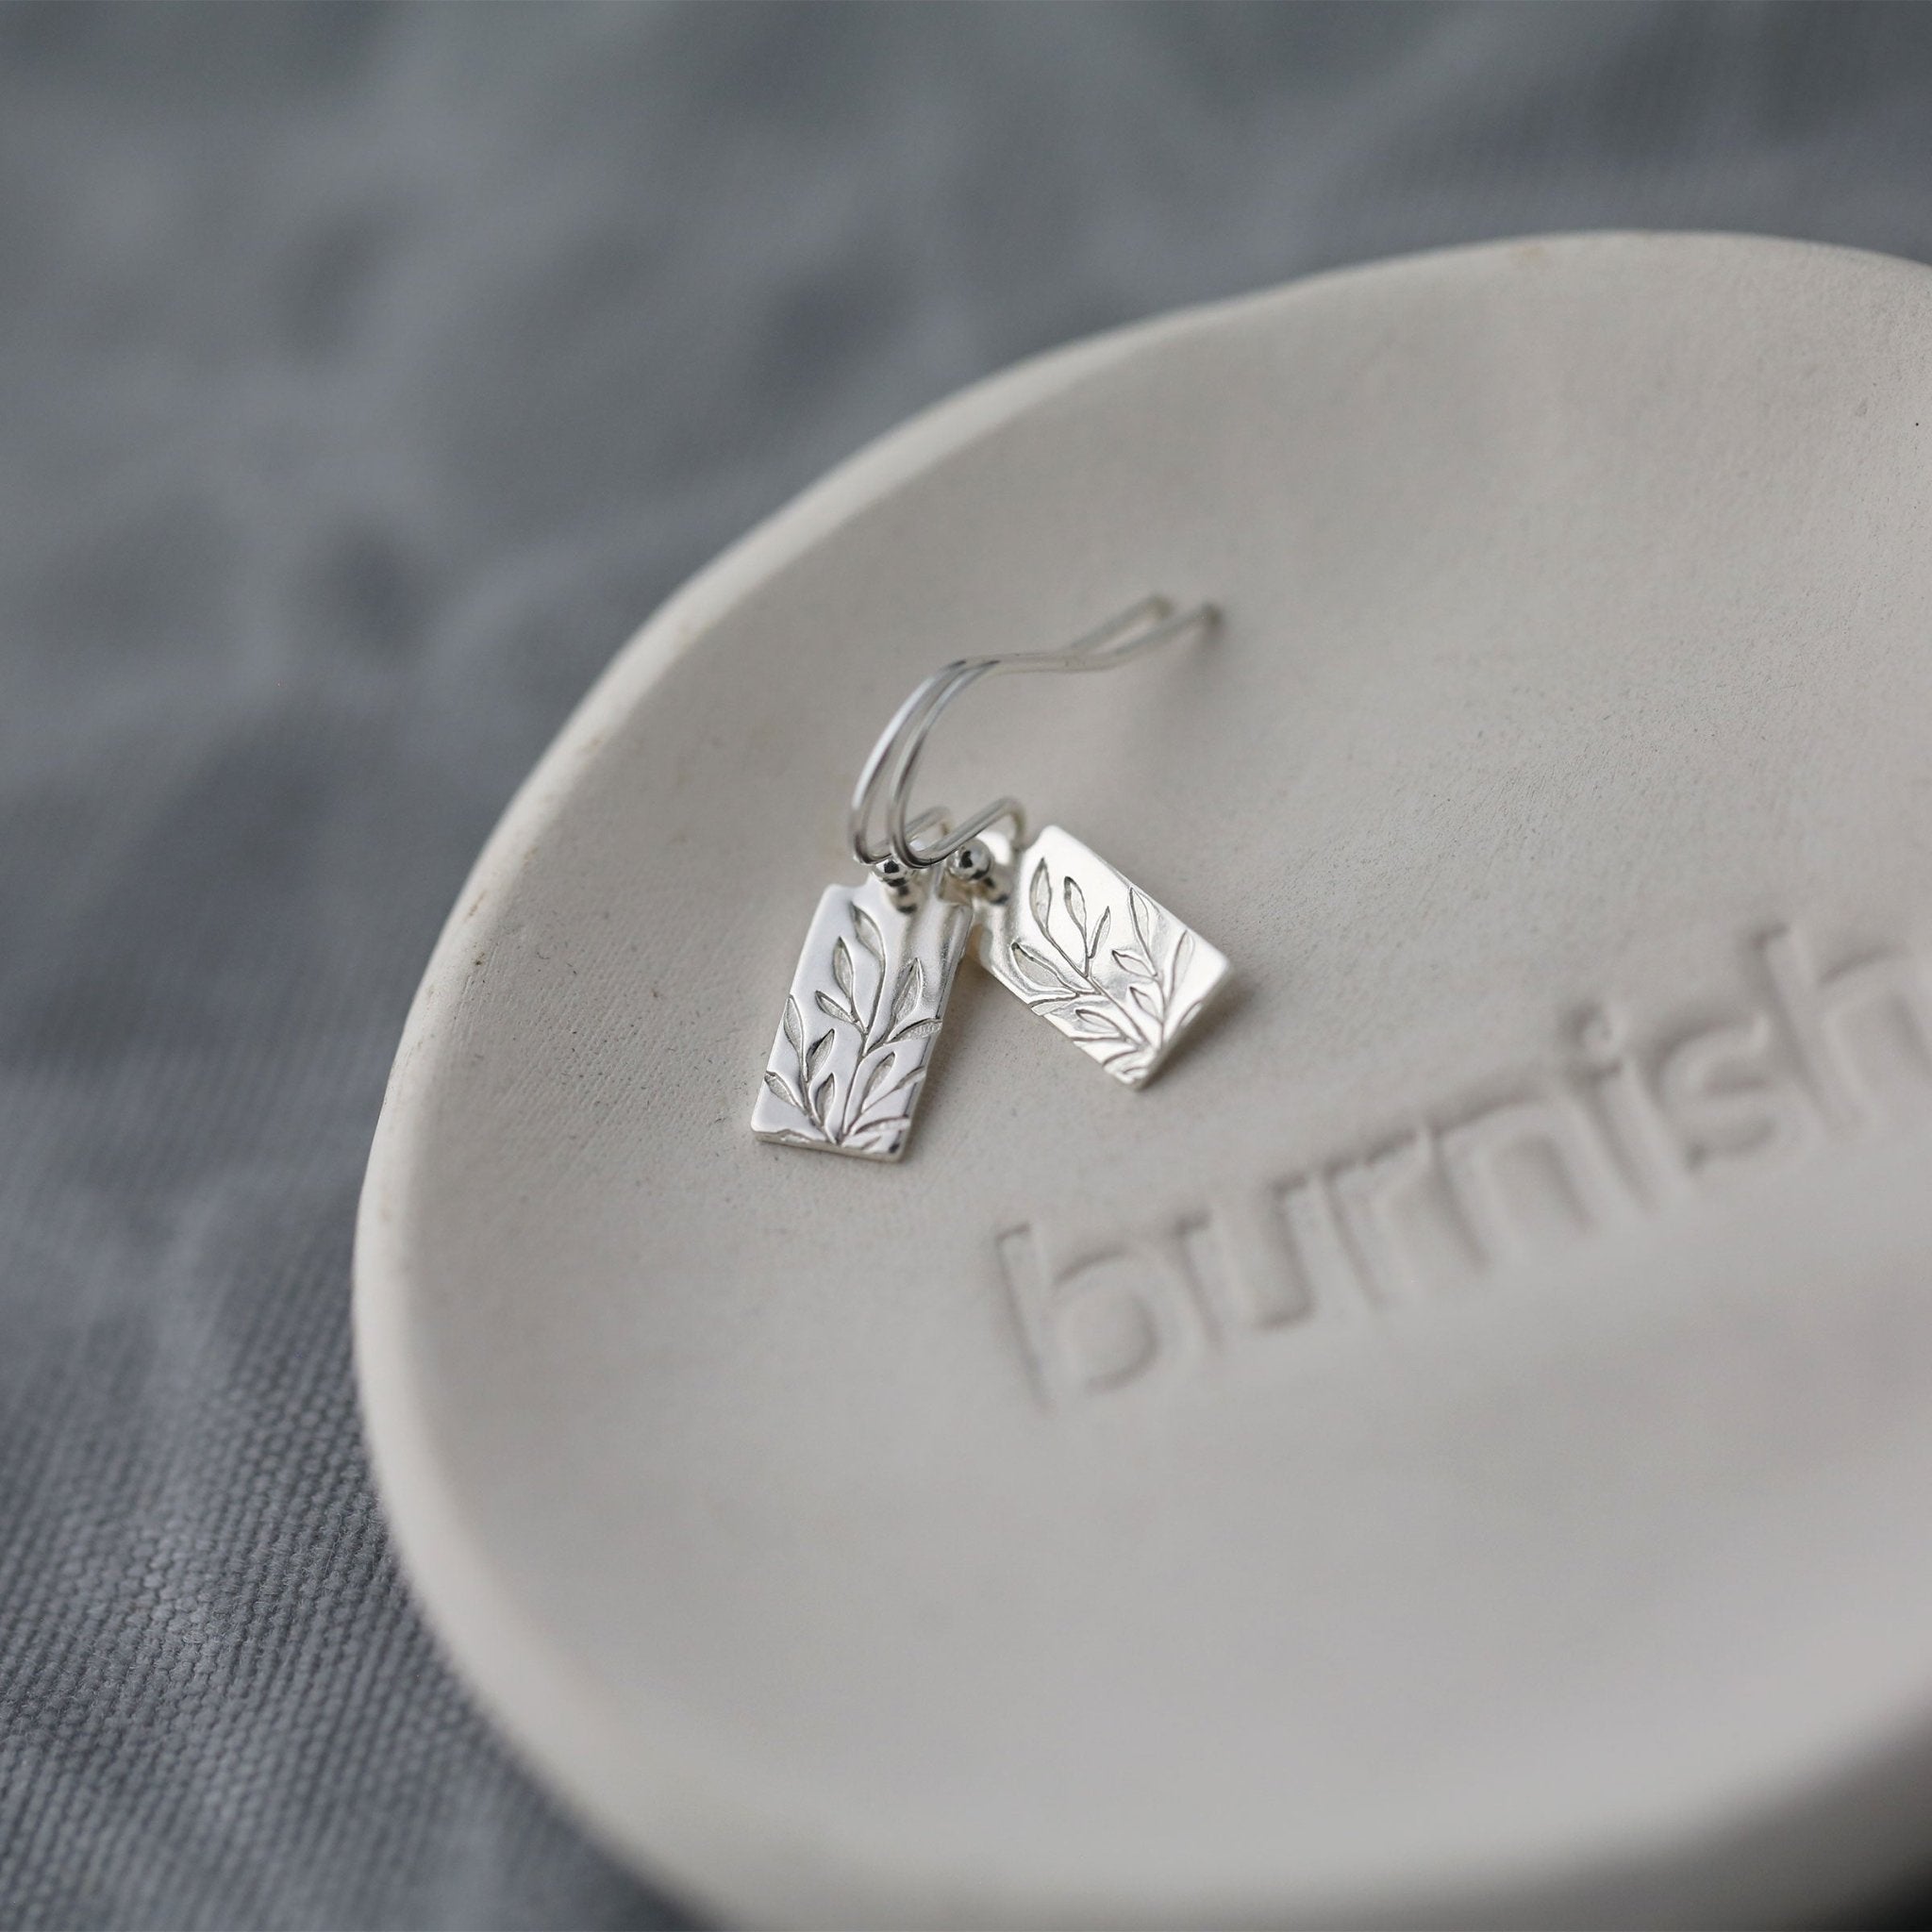 Tiny Willow Leaf Tag Earrings handmade by Burnish